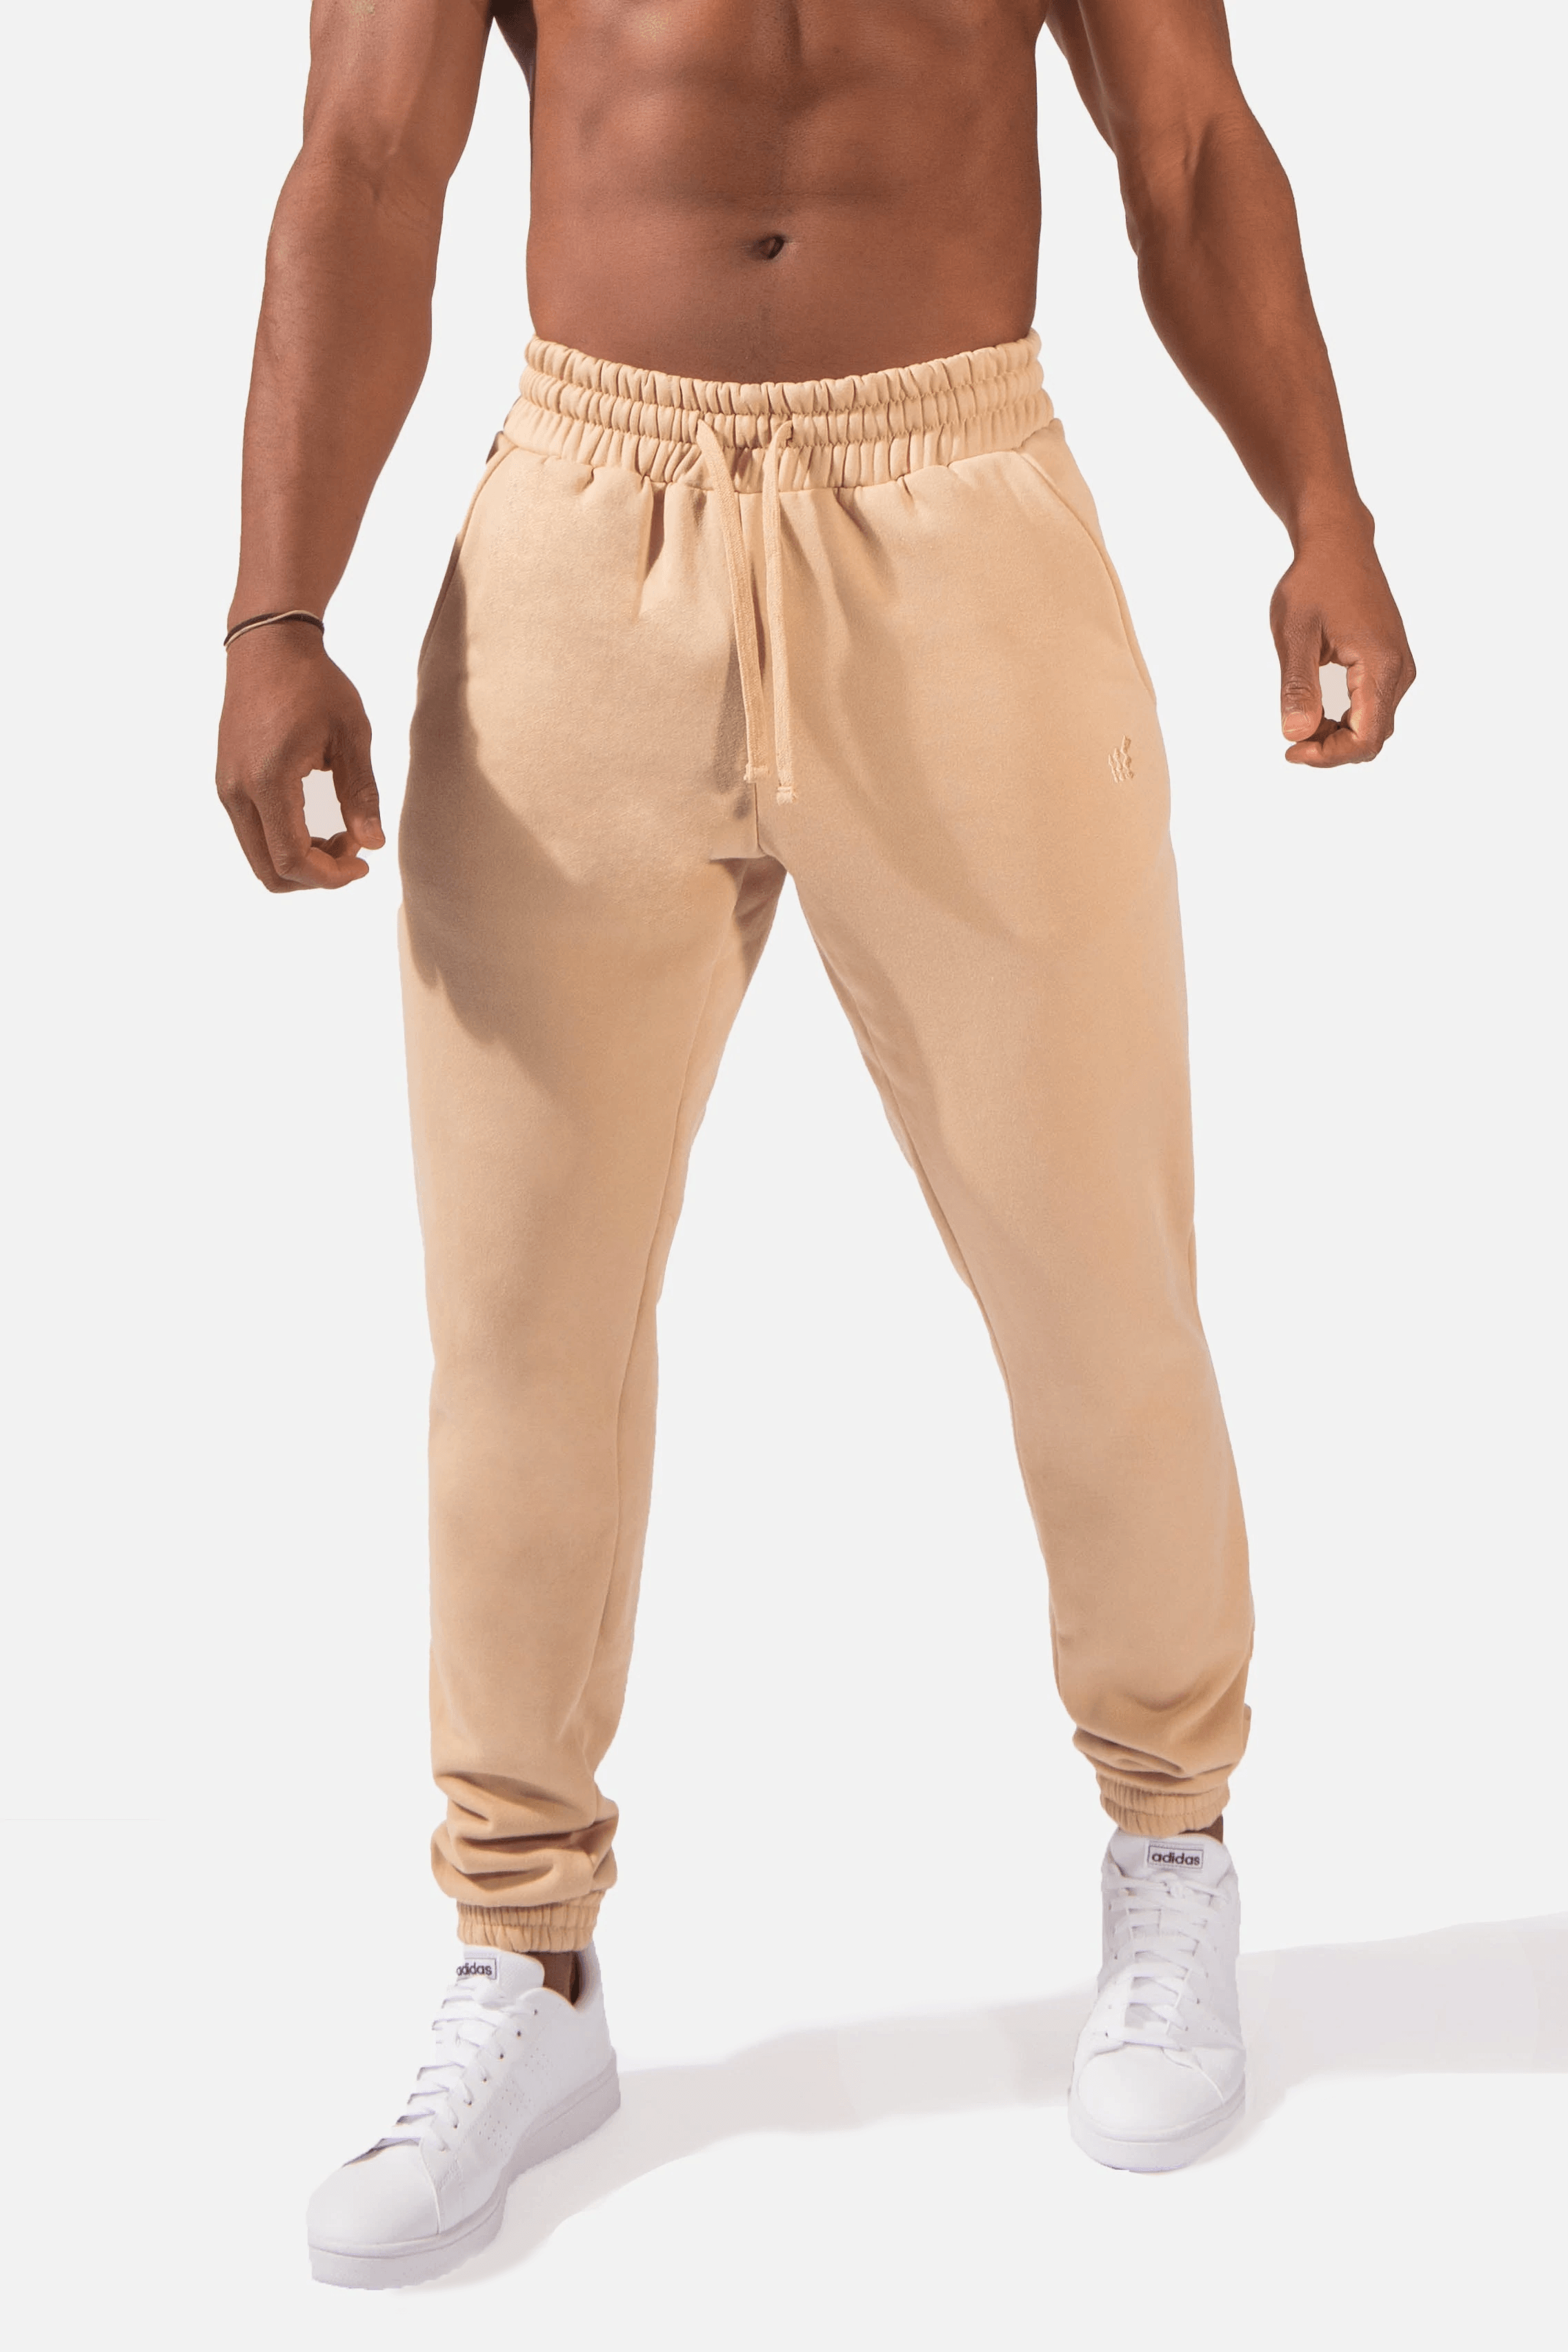 Revamp Joggers - Beige - Jed North